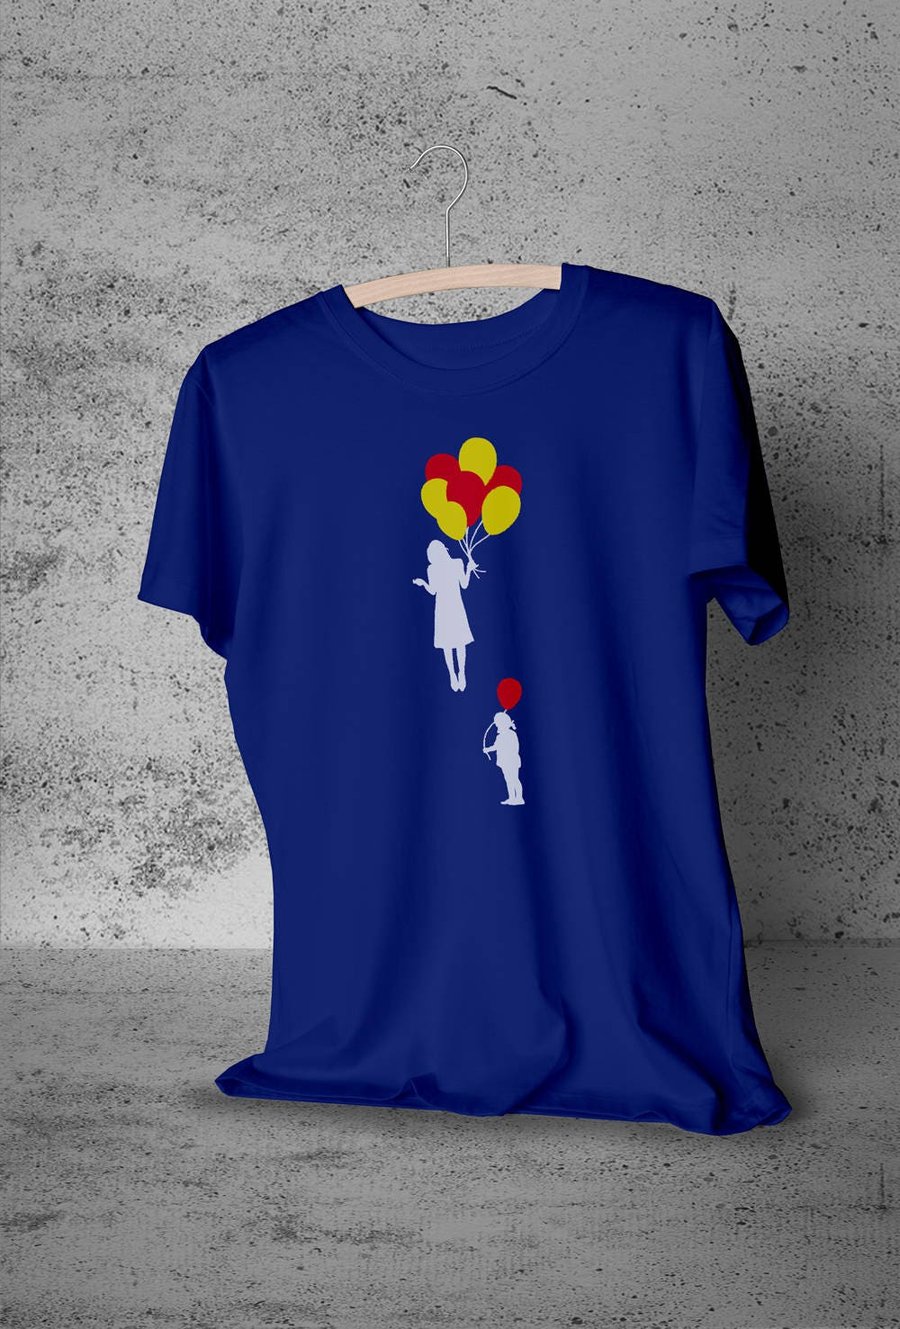 Mens funny tshirt. Where are you going?- T-Shirt. Balloons, party top